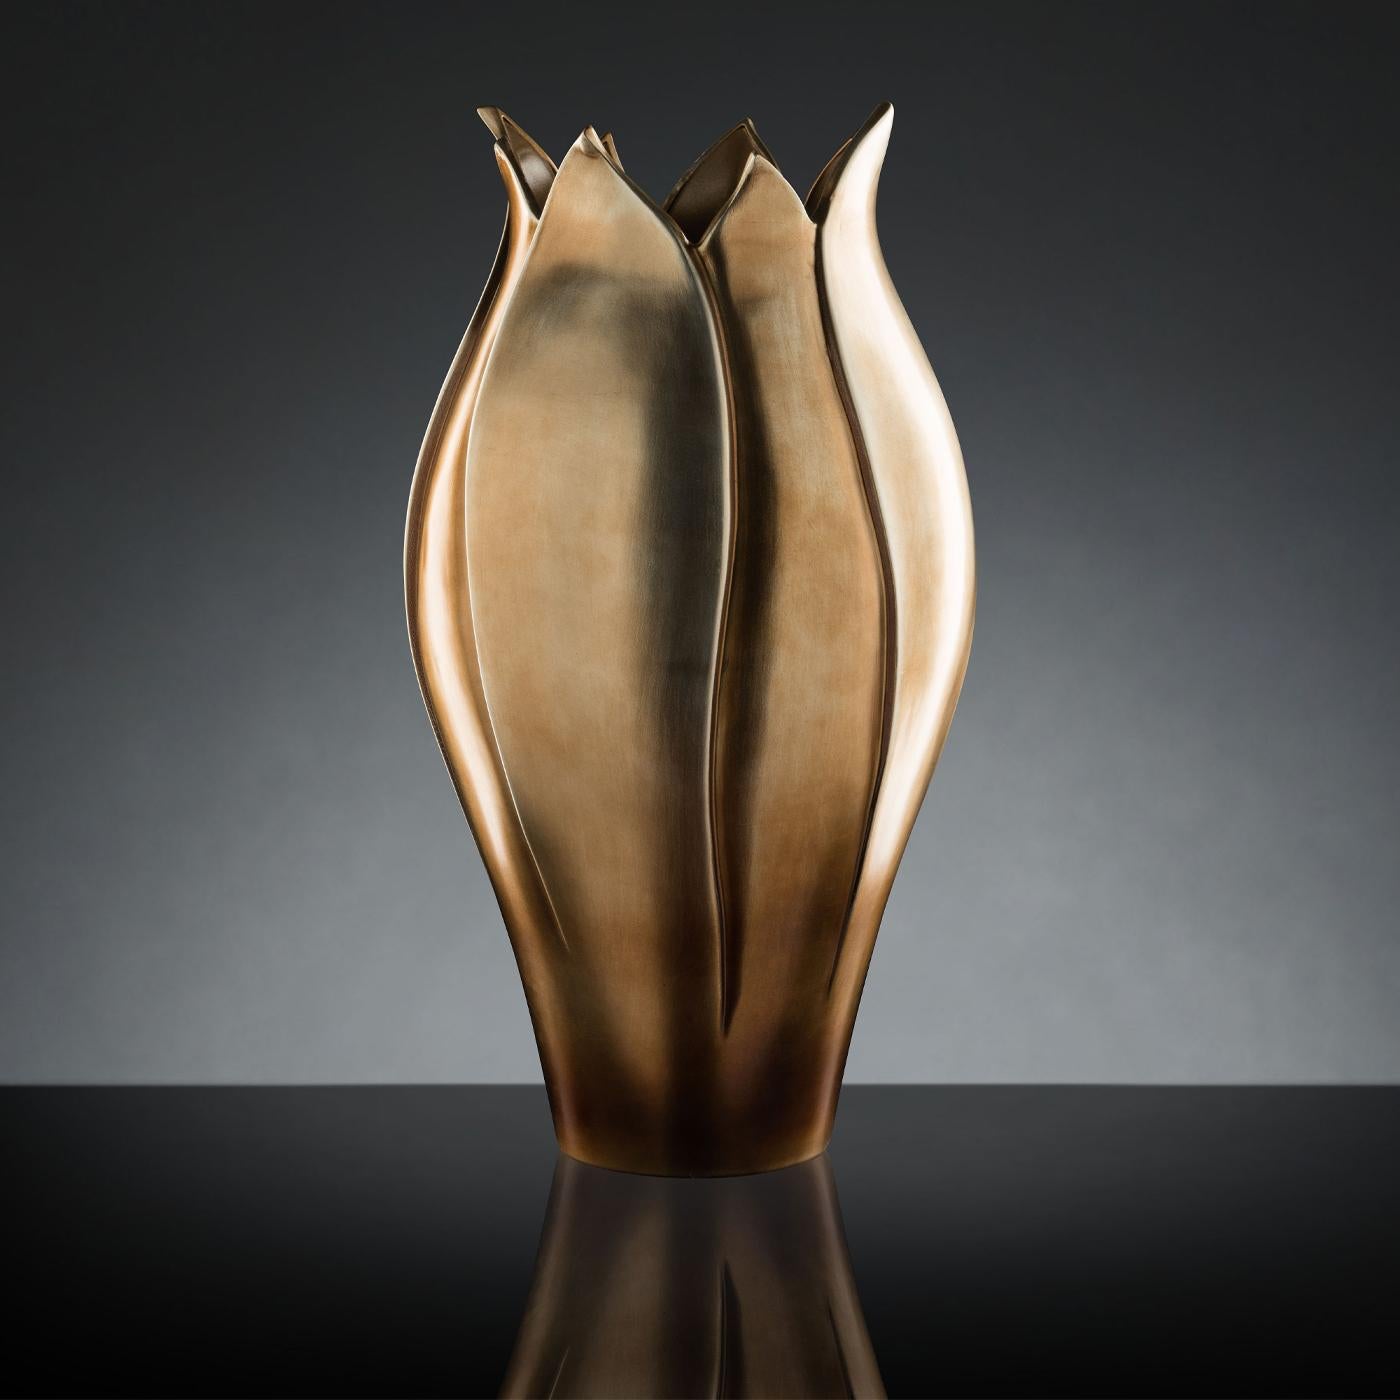 Sleek and refined, this vase exquisitely reproduces a tulip's bud. Boasting delicate and sinuous lines, it is handcrafted of ceramics showcasing an opaque and gleaming hue, reminiscent of brass' natural color. This vase will perfectly suit